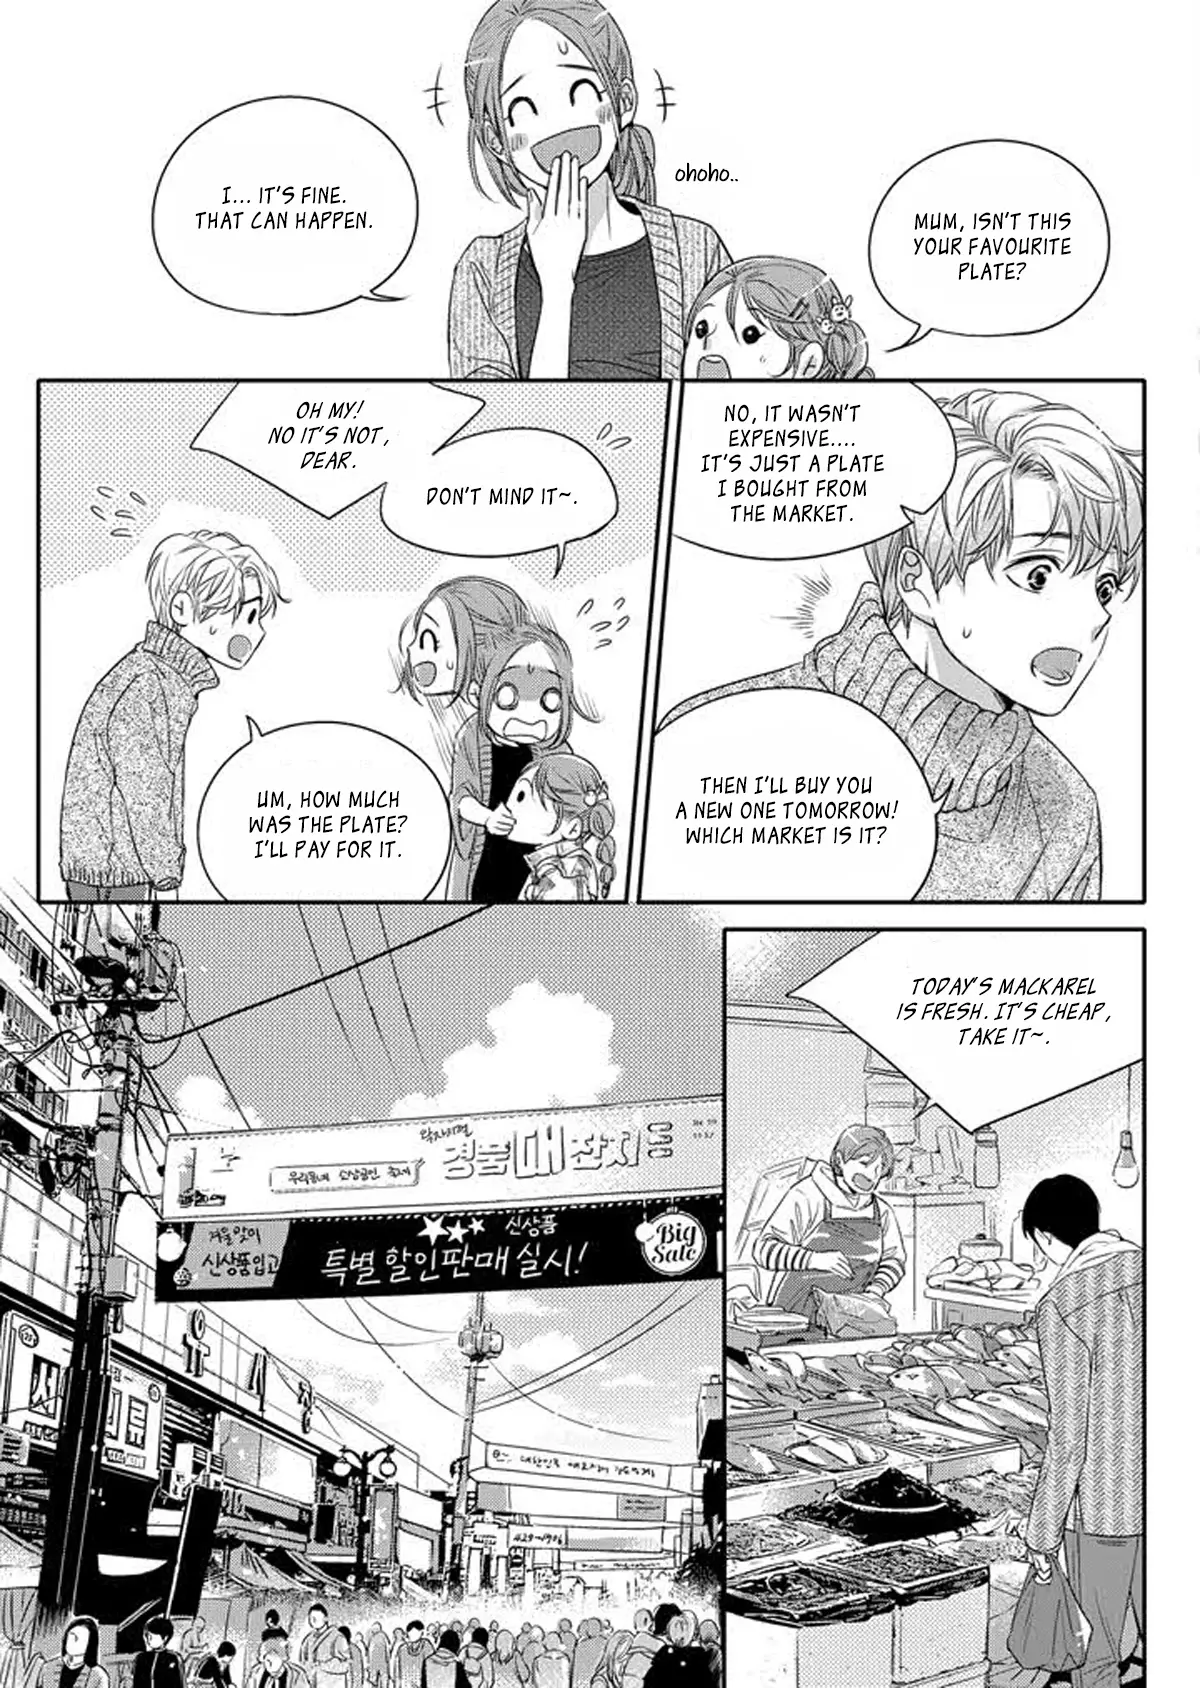 Unintentional Love Story - 1 page 16